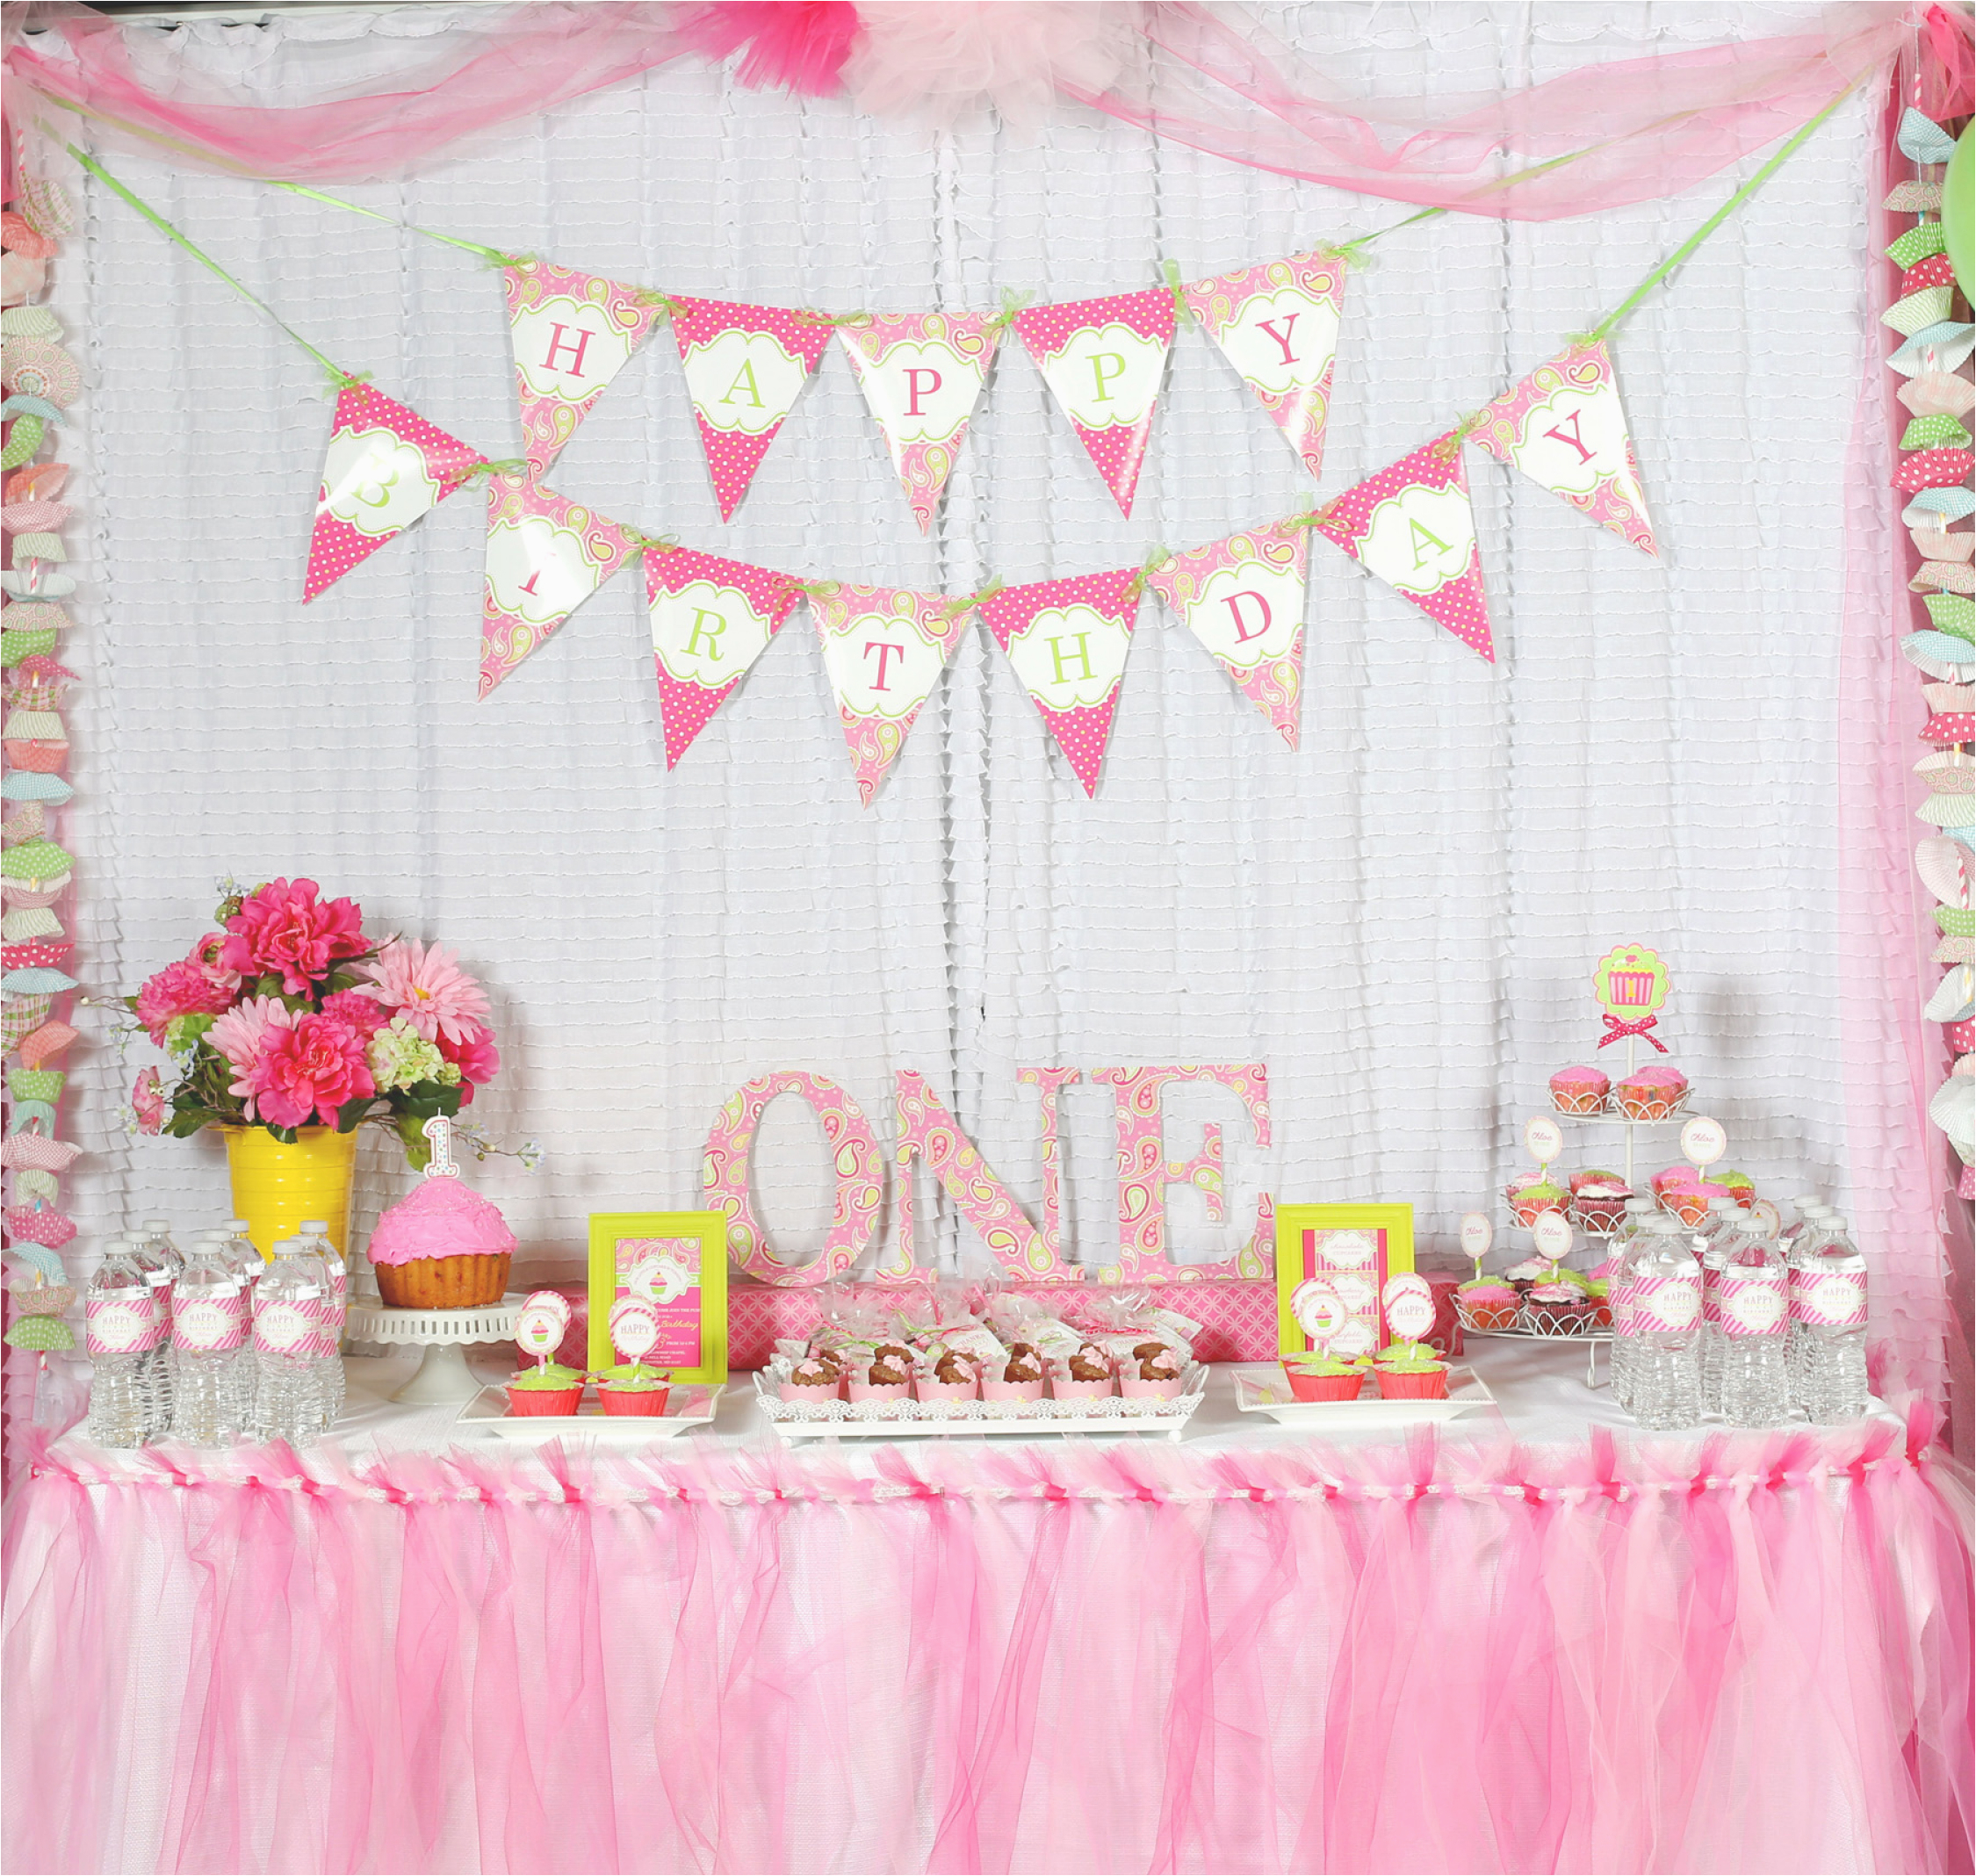 My First Birthday Decorations A Cupcake themed 1st Birthday Party with Paisley and Polka